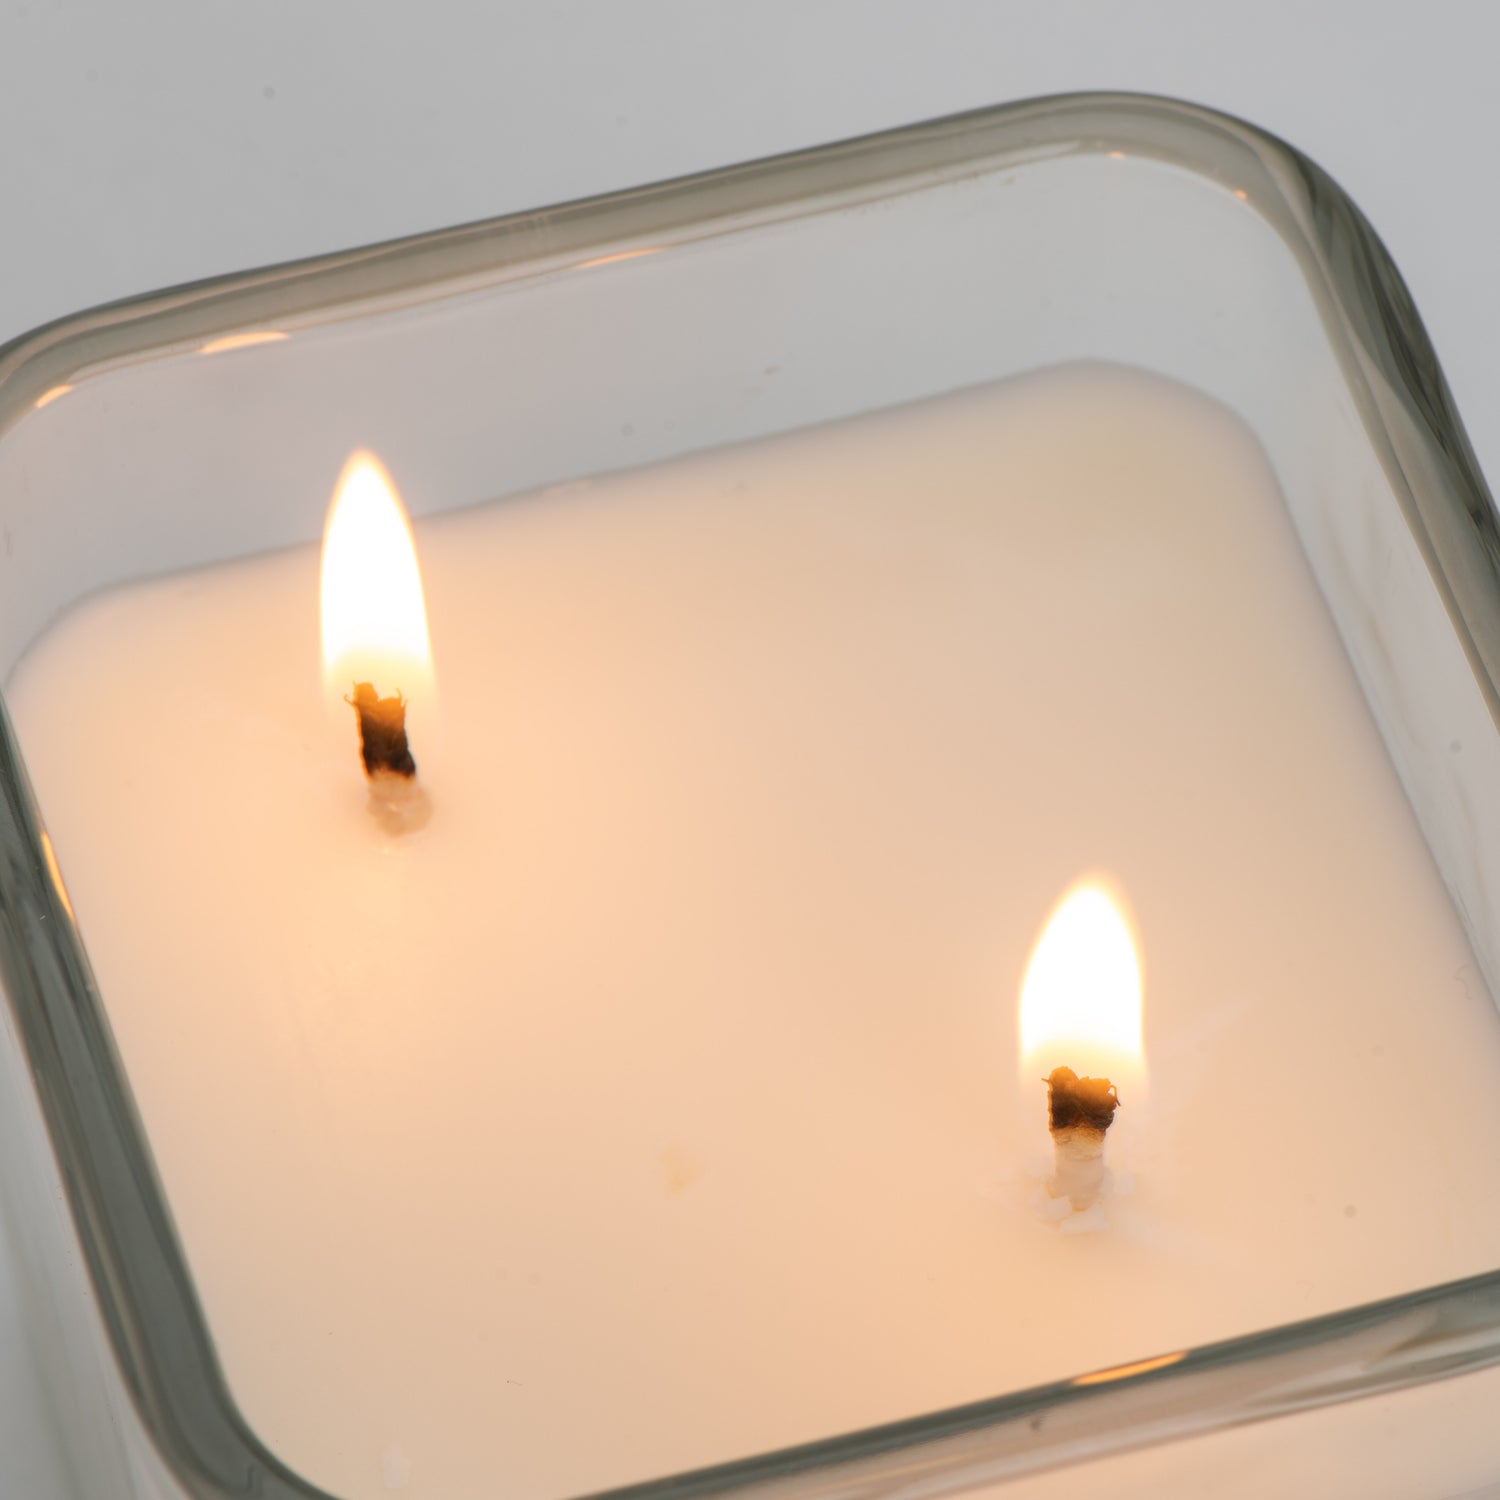 Double wick soy candle burning